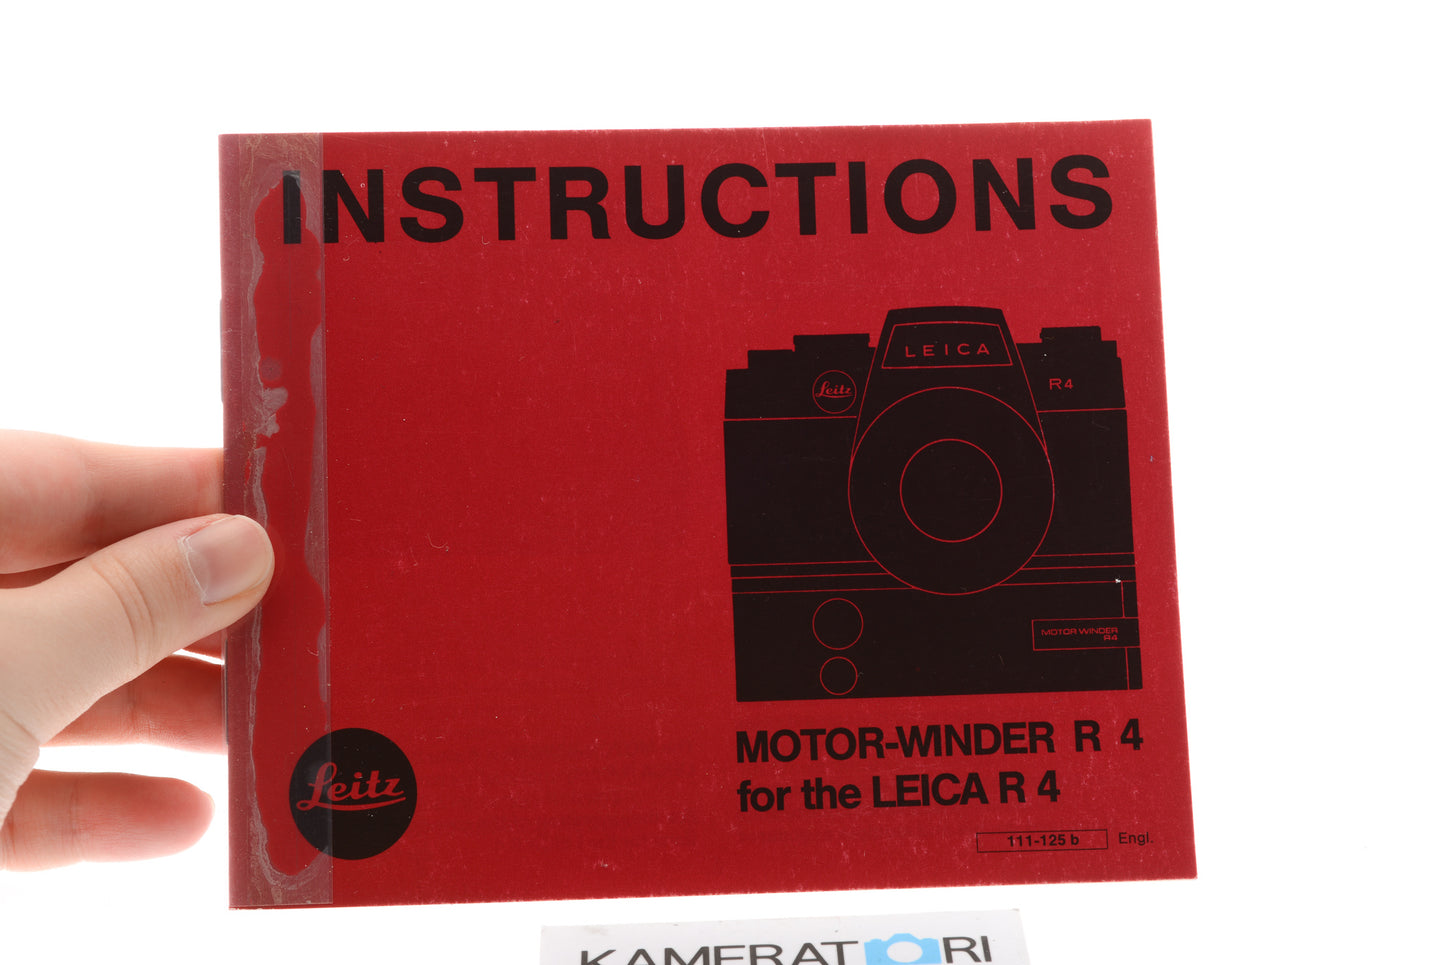 Leica Motor-Winder R4 for Leica R4 Instructions